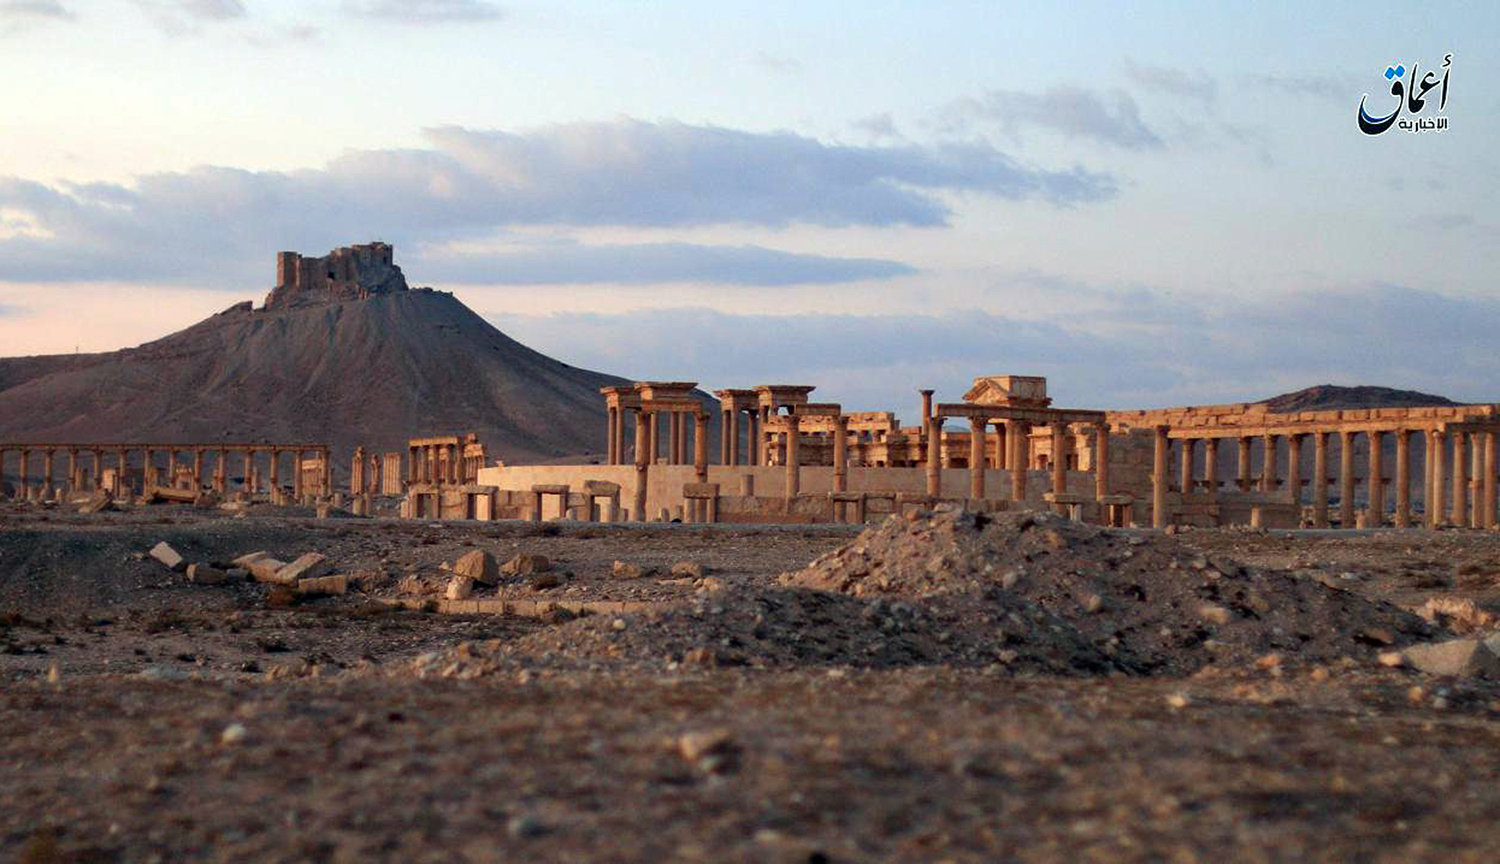 This image posted online on Sunday, Dec. 11, 2016, by the Aamaq News Agency, a media arm of the Islamic State group, purports to show a general view of the ancient ruins of the city of Palmyra, in Homs province, Syria, with the Citadel of Palmyra in the background. (Militant video via AP)